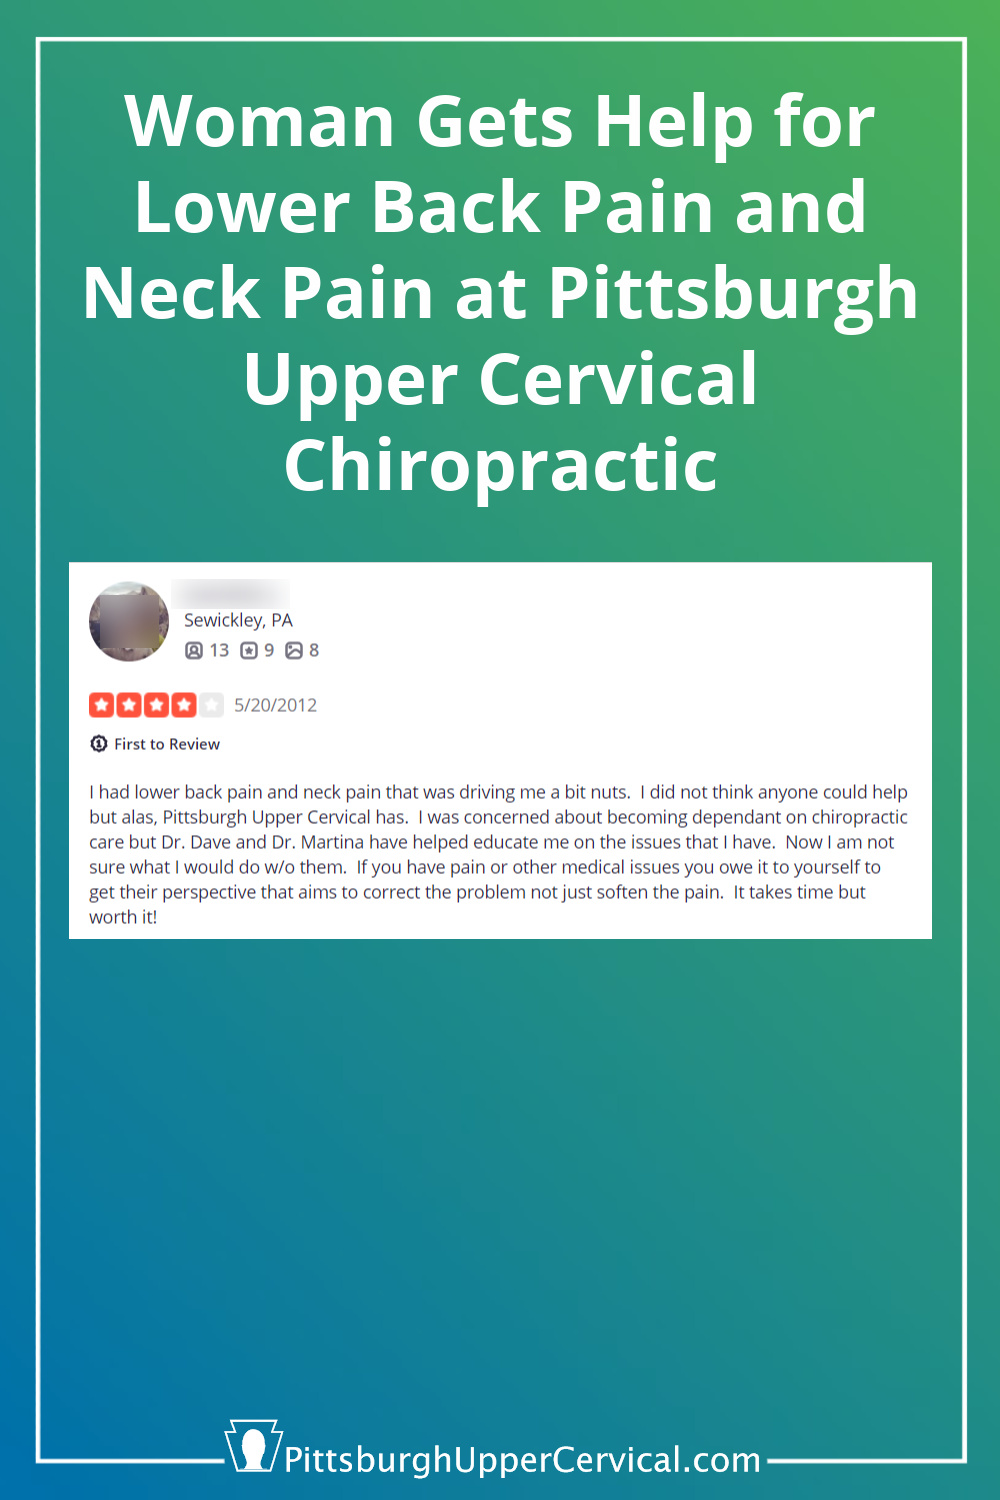 Help for Lower Back Pain and Neck Pain at Pittsburgh Upper Cervical Chiropractic Pinterest Pin